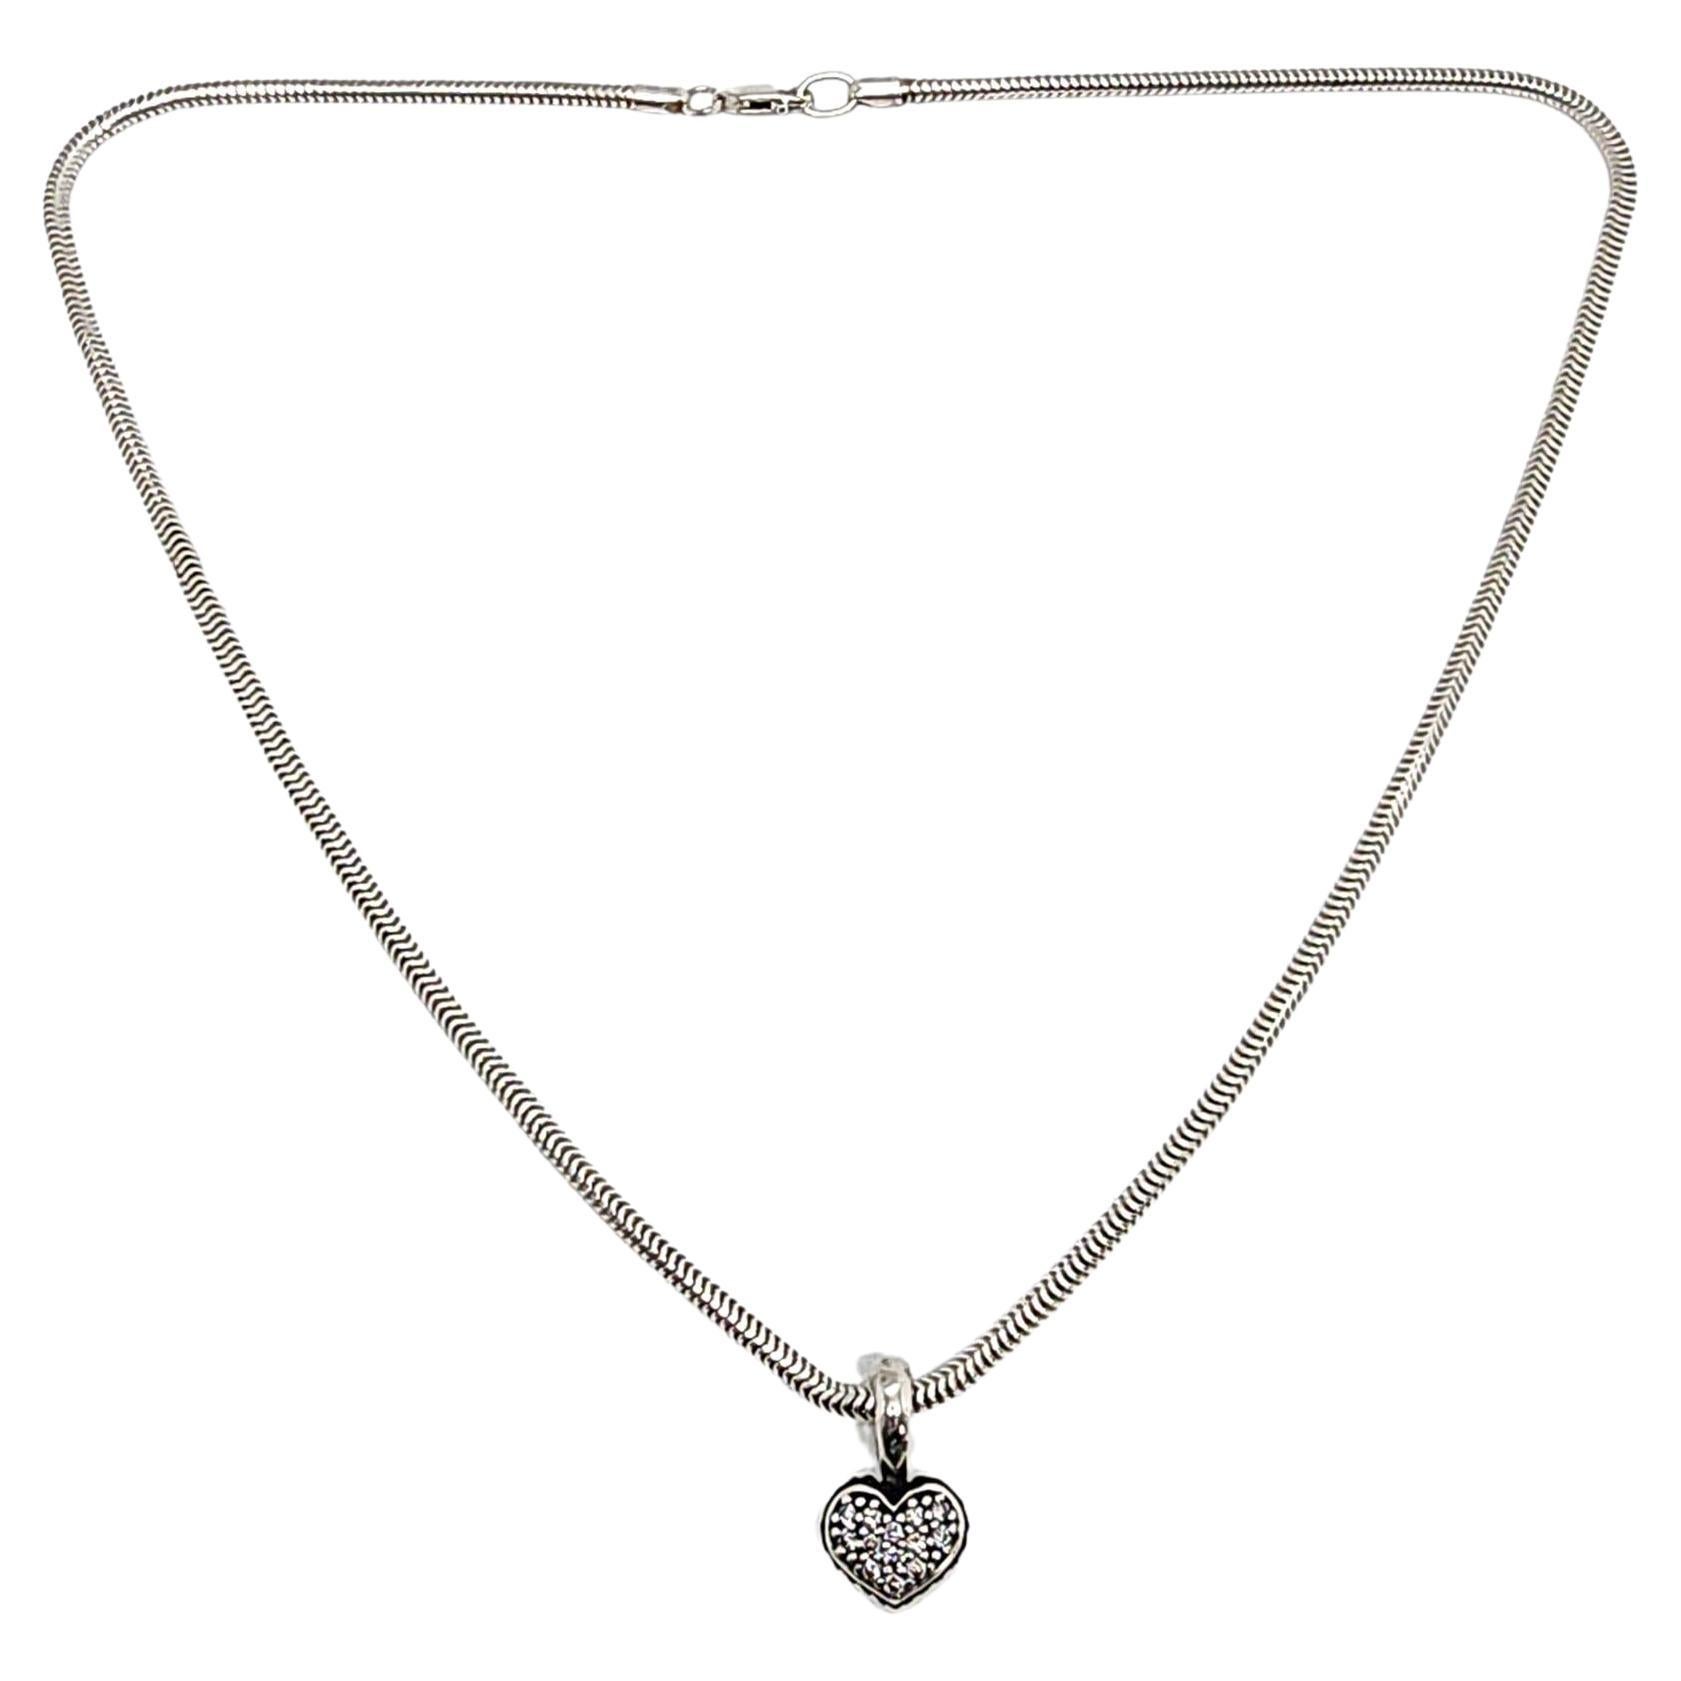 Lagos Caviar Sterling Silver Necklace with Heart Pendant | EBTH